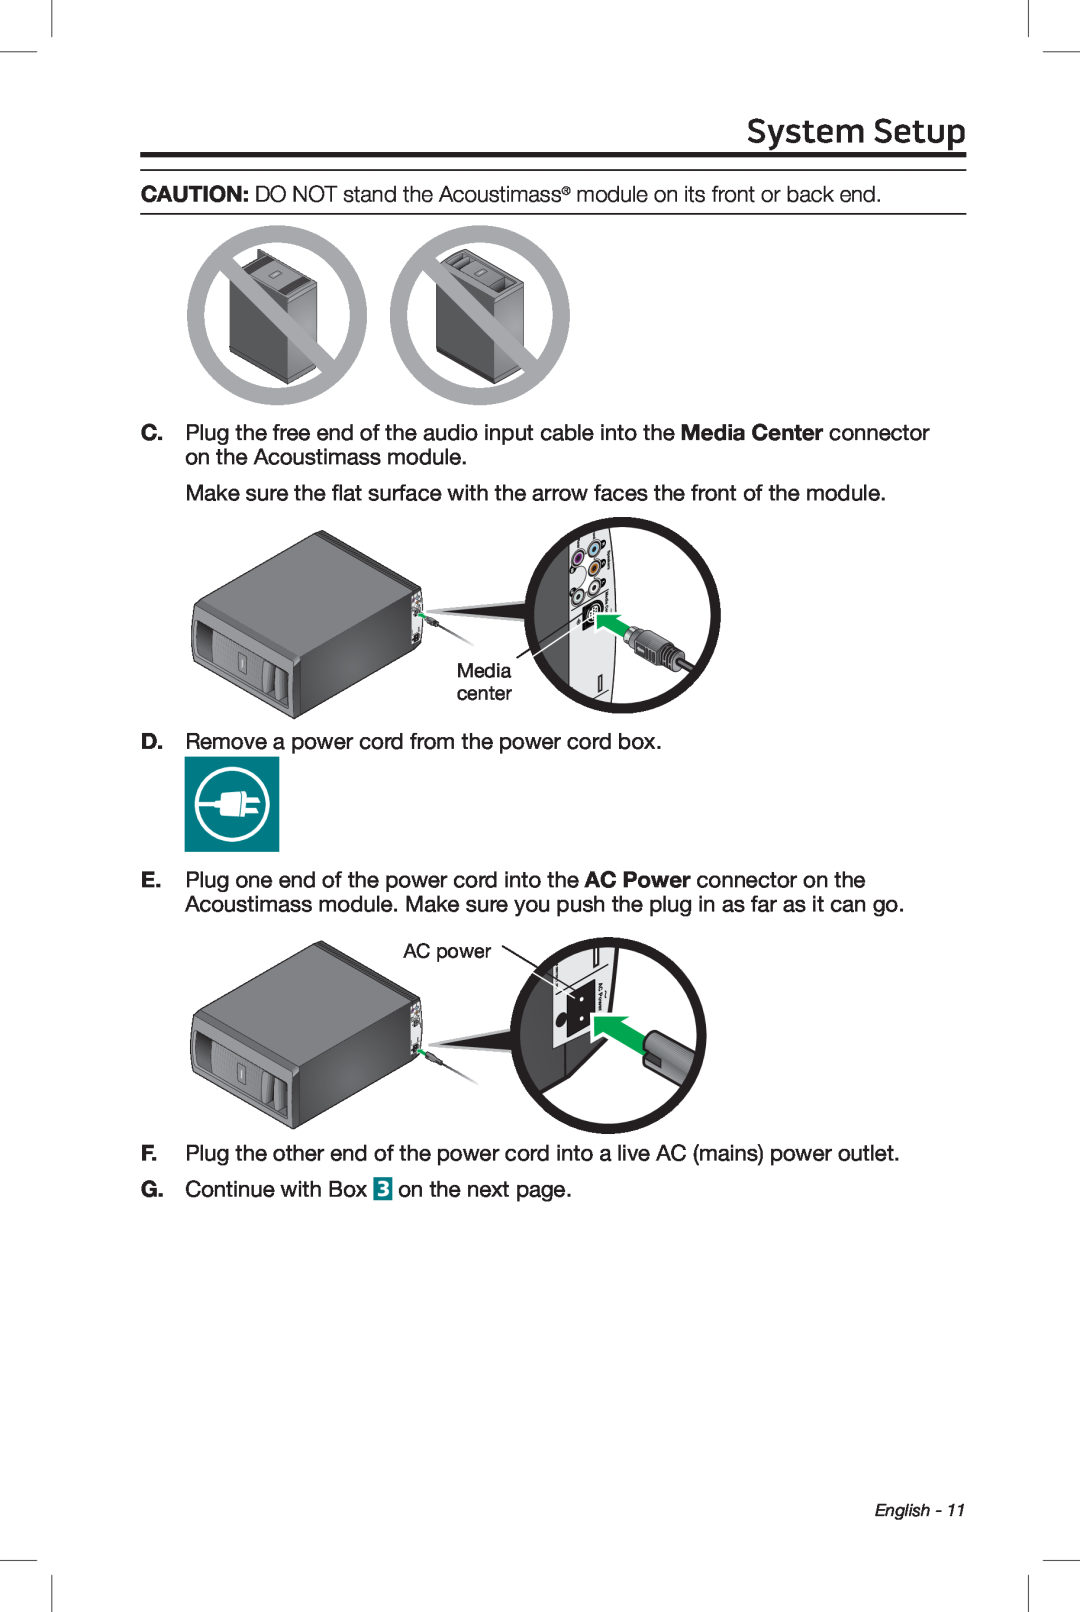 Bose 510, 535, 520, 525 setup guide System Setup, D.Remove a power cord from the power cord box 